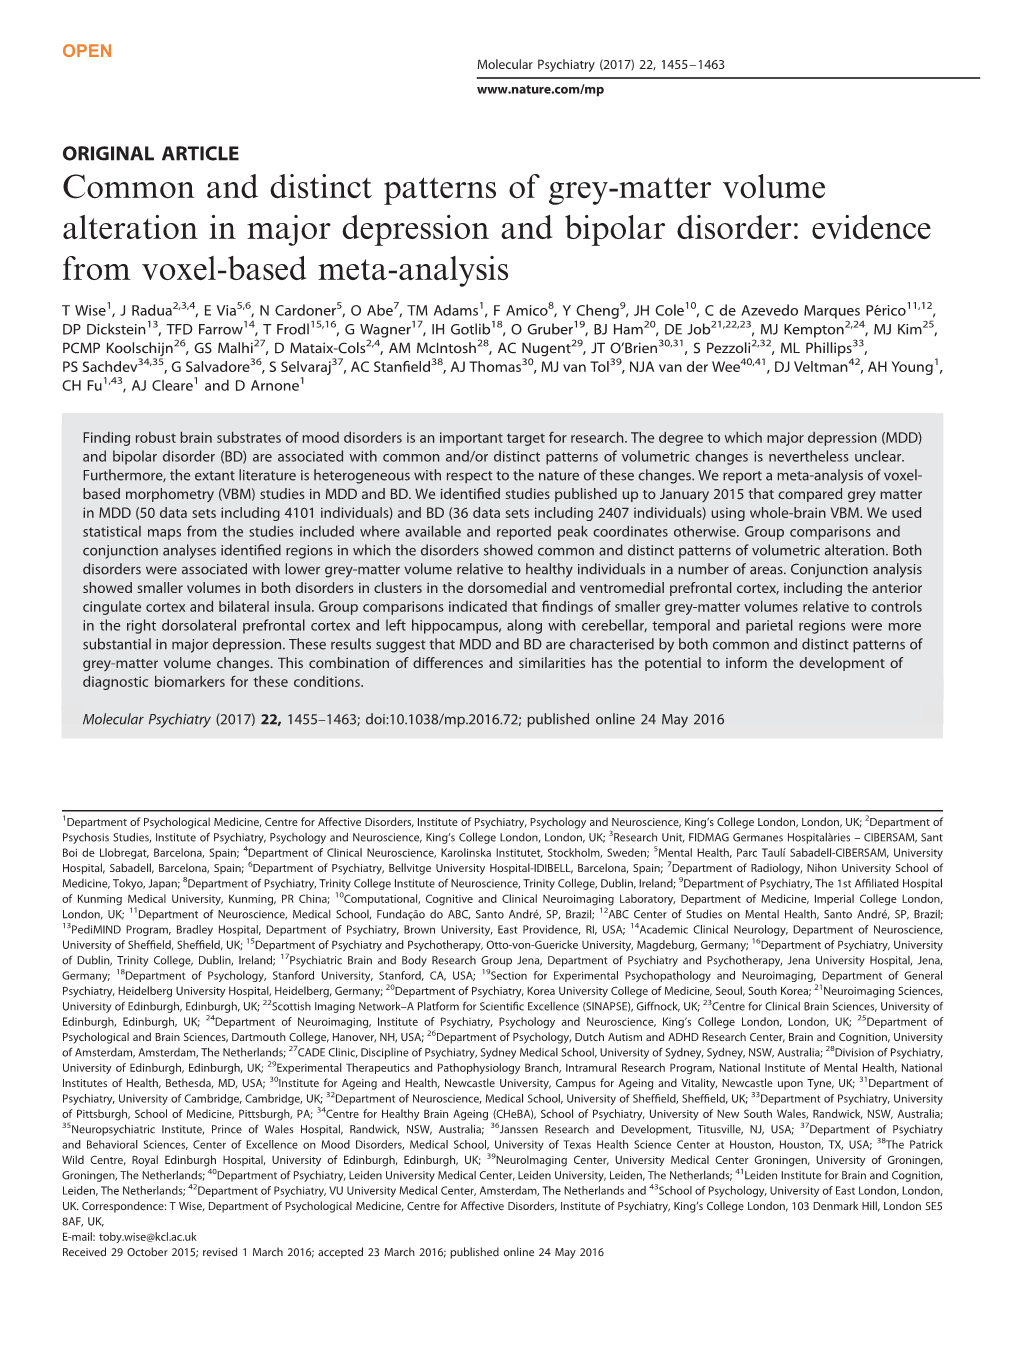 Common and Distinct Patterns of Grey-Matter Volume Alteration in Major Depression and Bipolar Disorder: Evidence from Voxel-Based Meta-Analysis